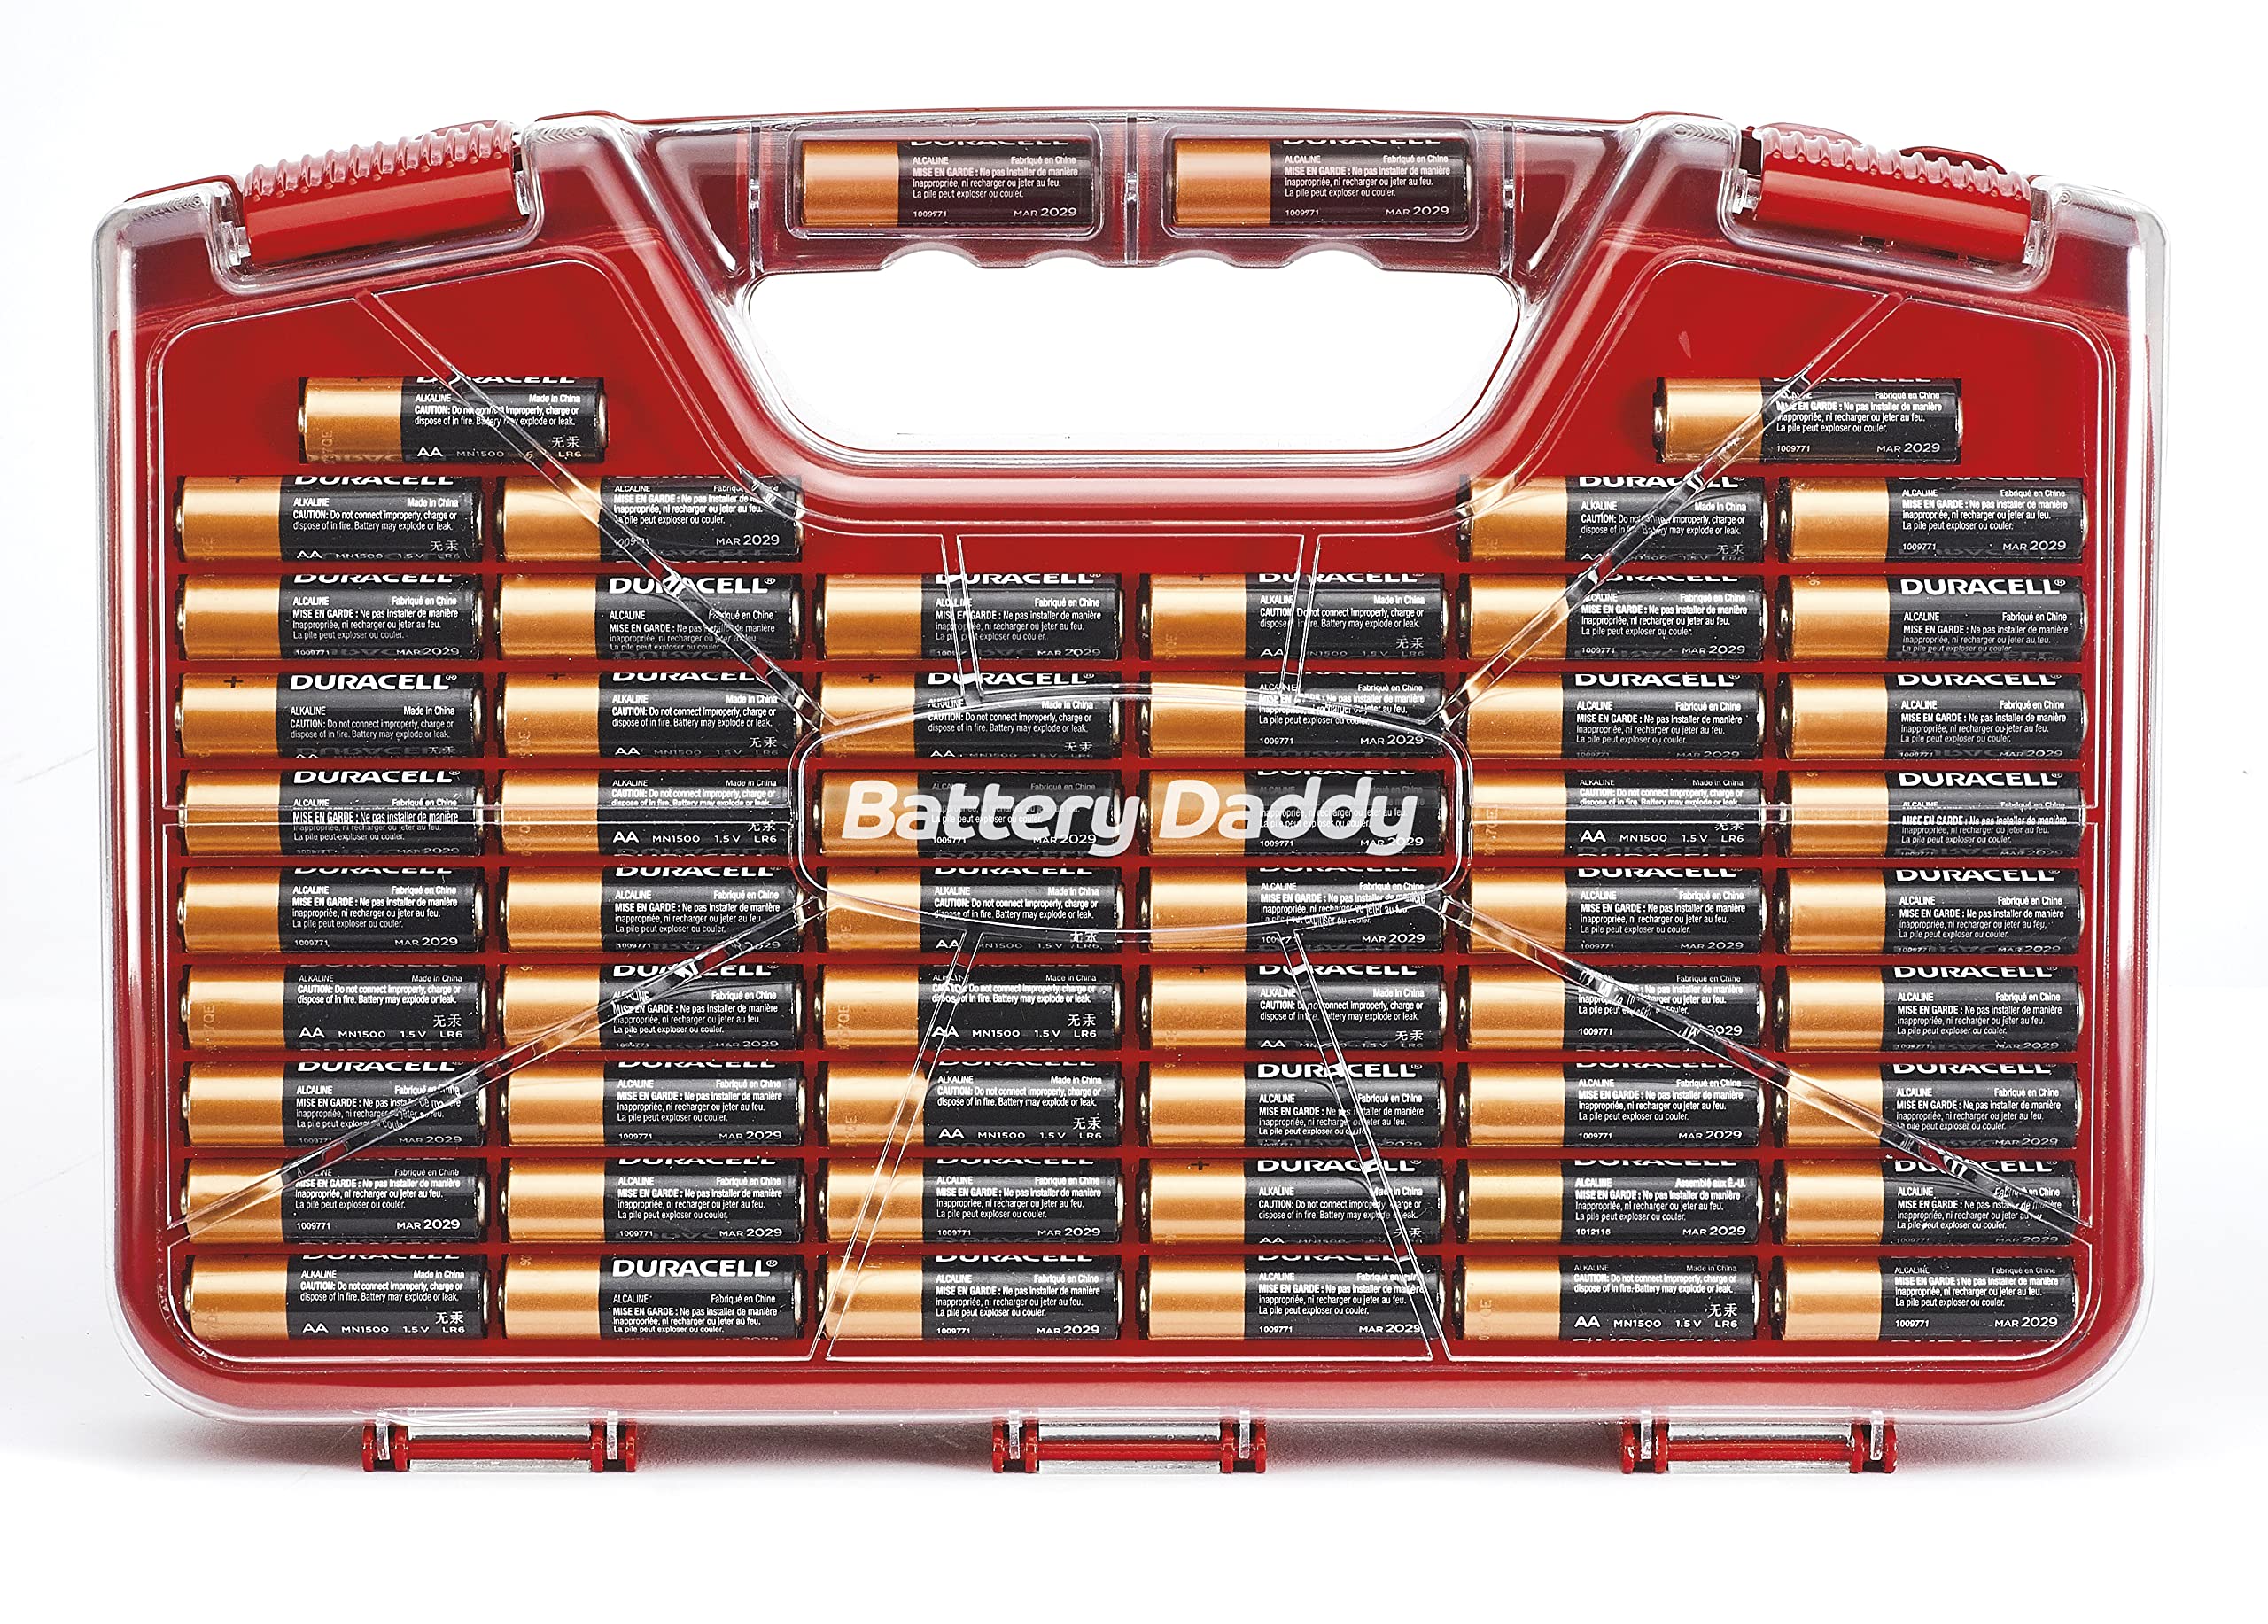 Ontel Battery Daddy - Battery Organizer Storage Case with Tester, Stores & Protects Up to 180 Batteries, Clear Locking Lid, As Seen On TV